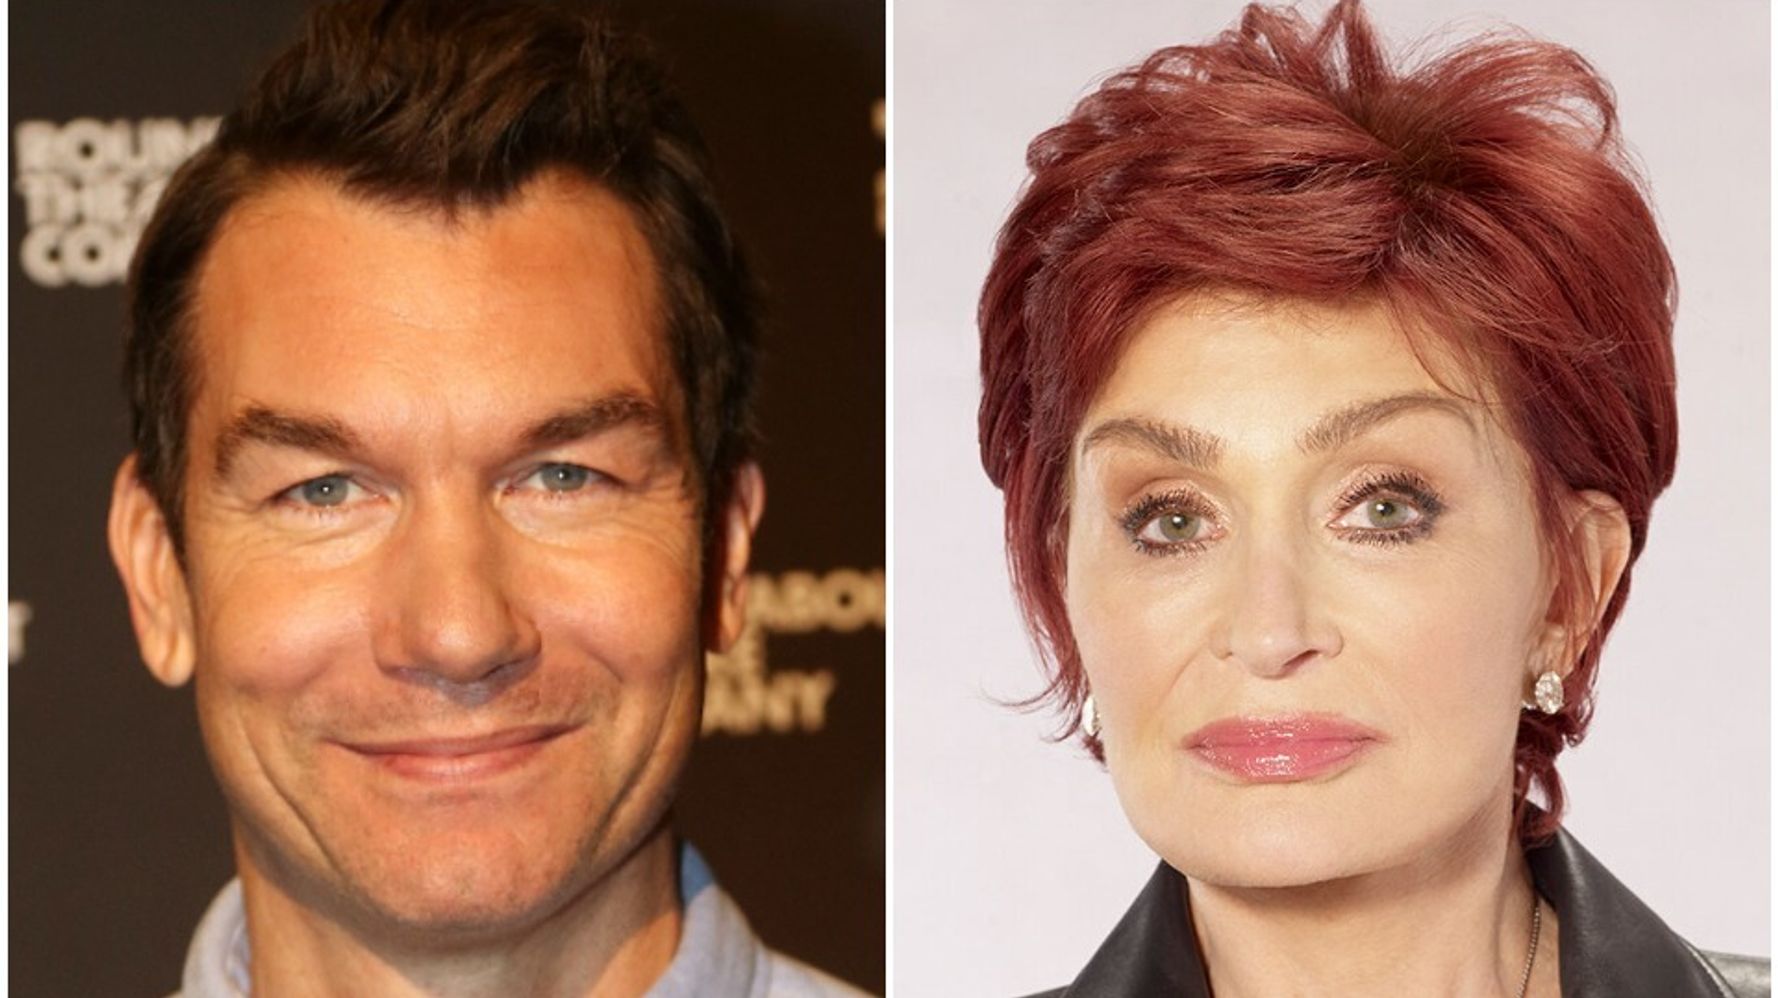 Jerry O'Connell Replaces Sharon Osbourne On 'The Talk,' And Viewers Have Thoughts